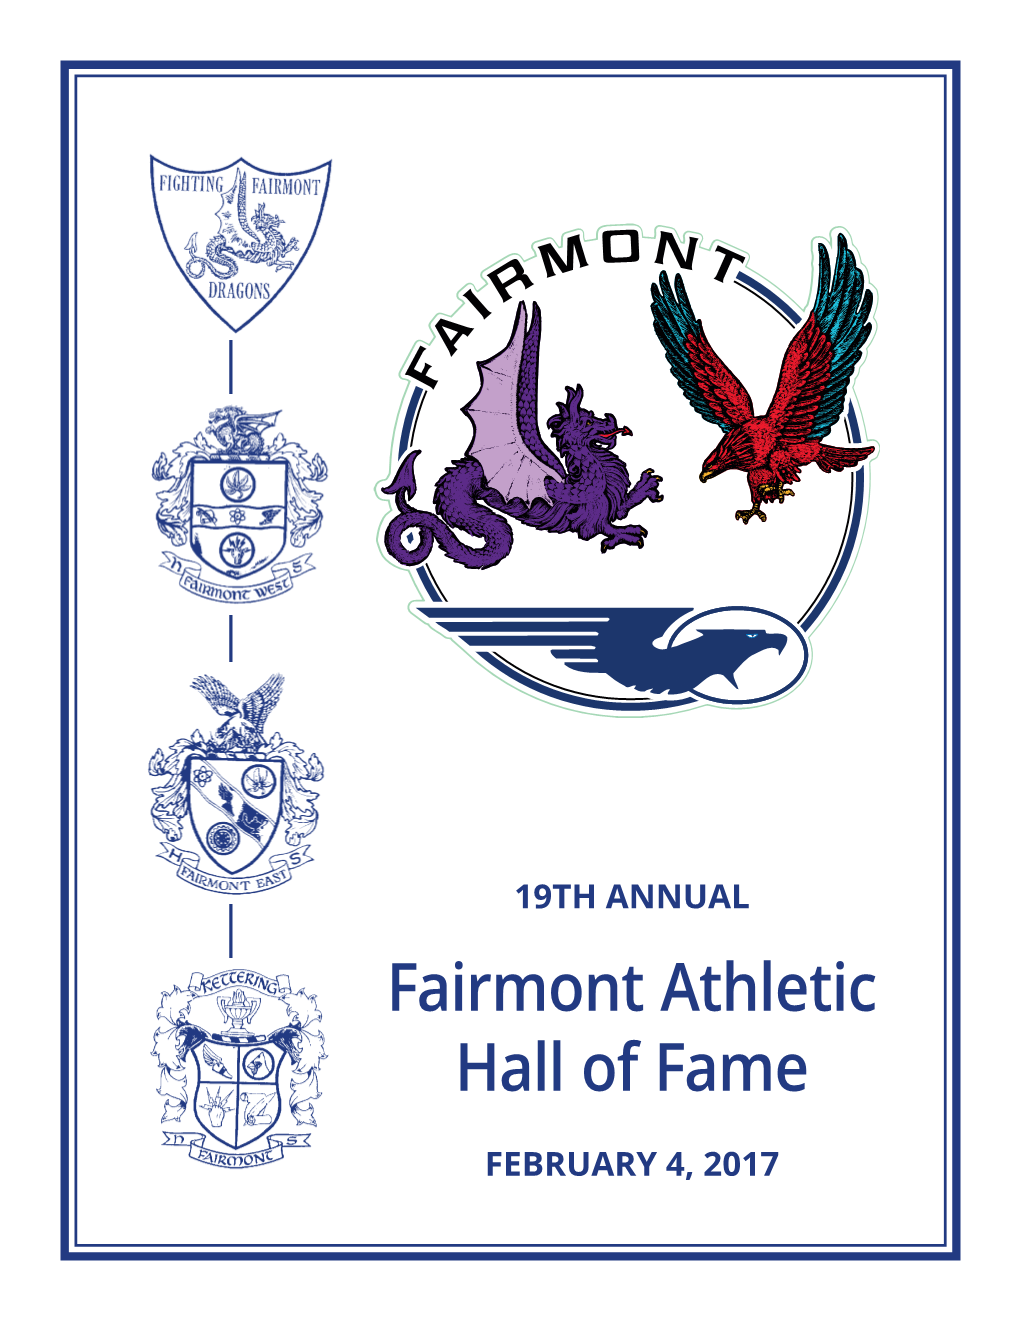 Fairmont Athletic Hall of Fame